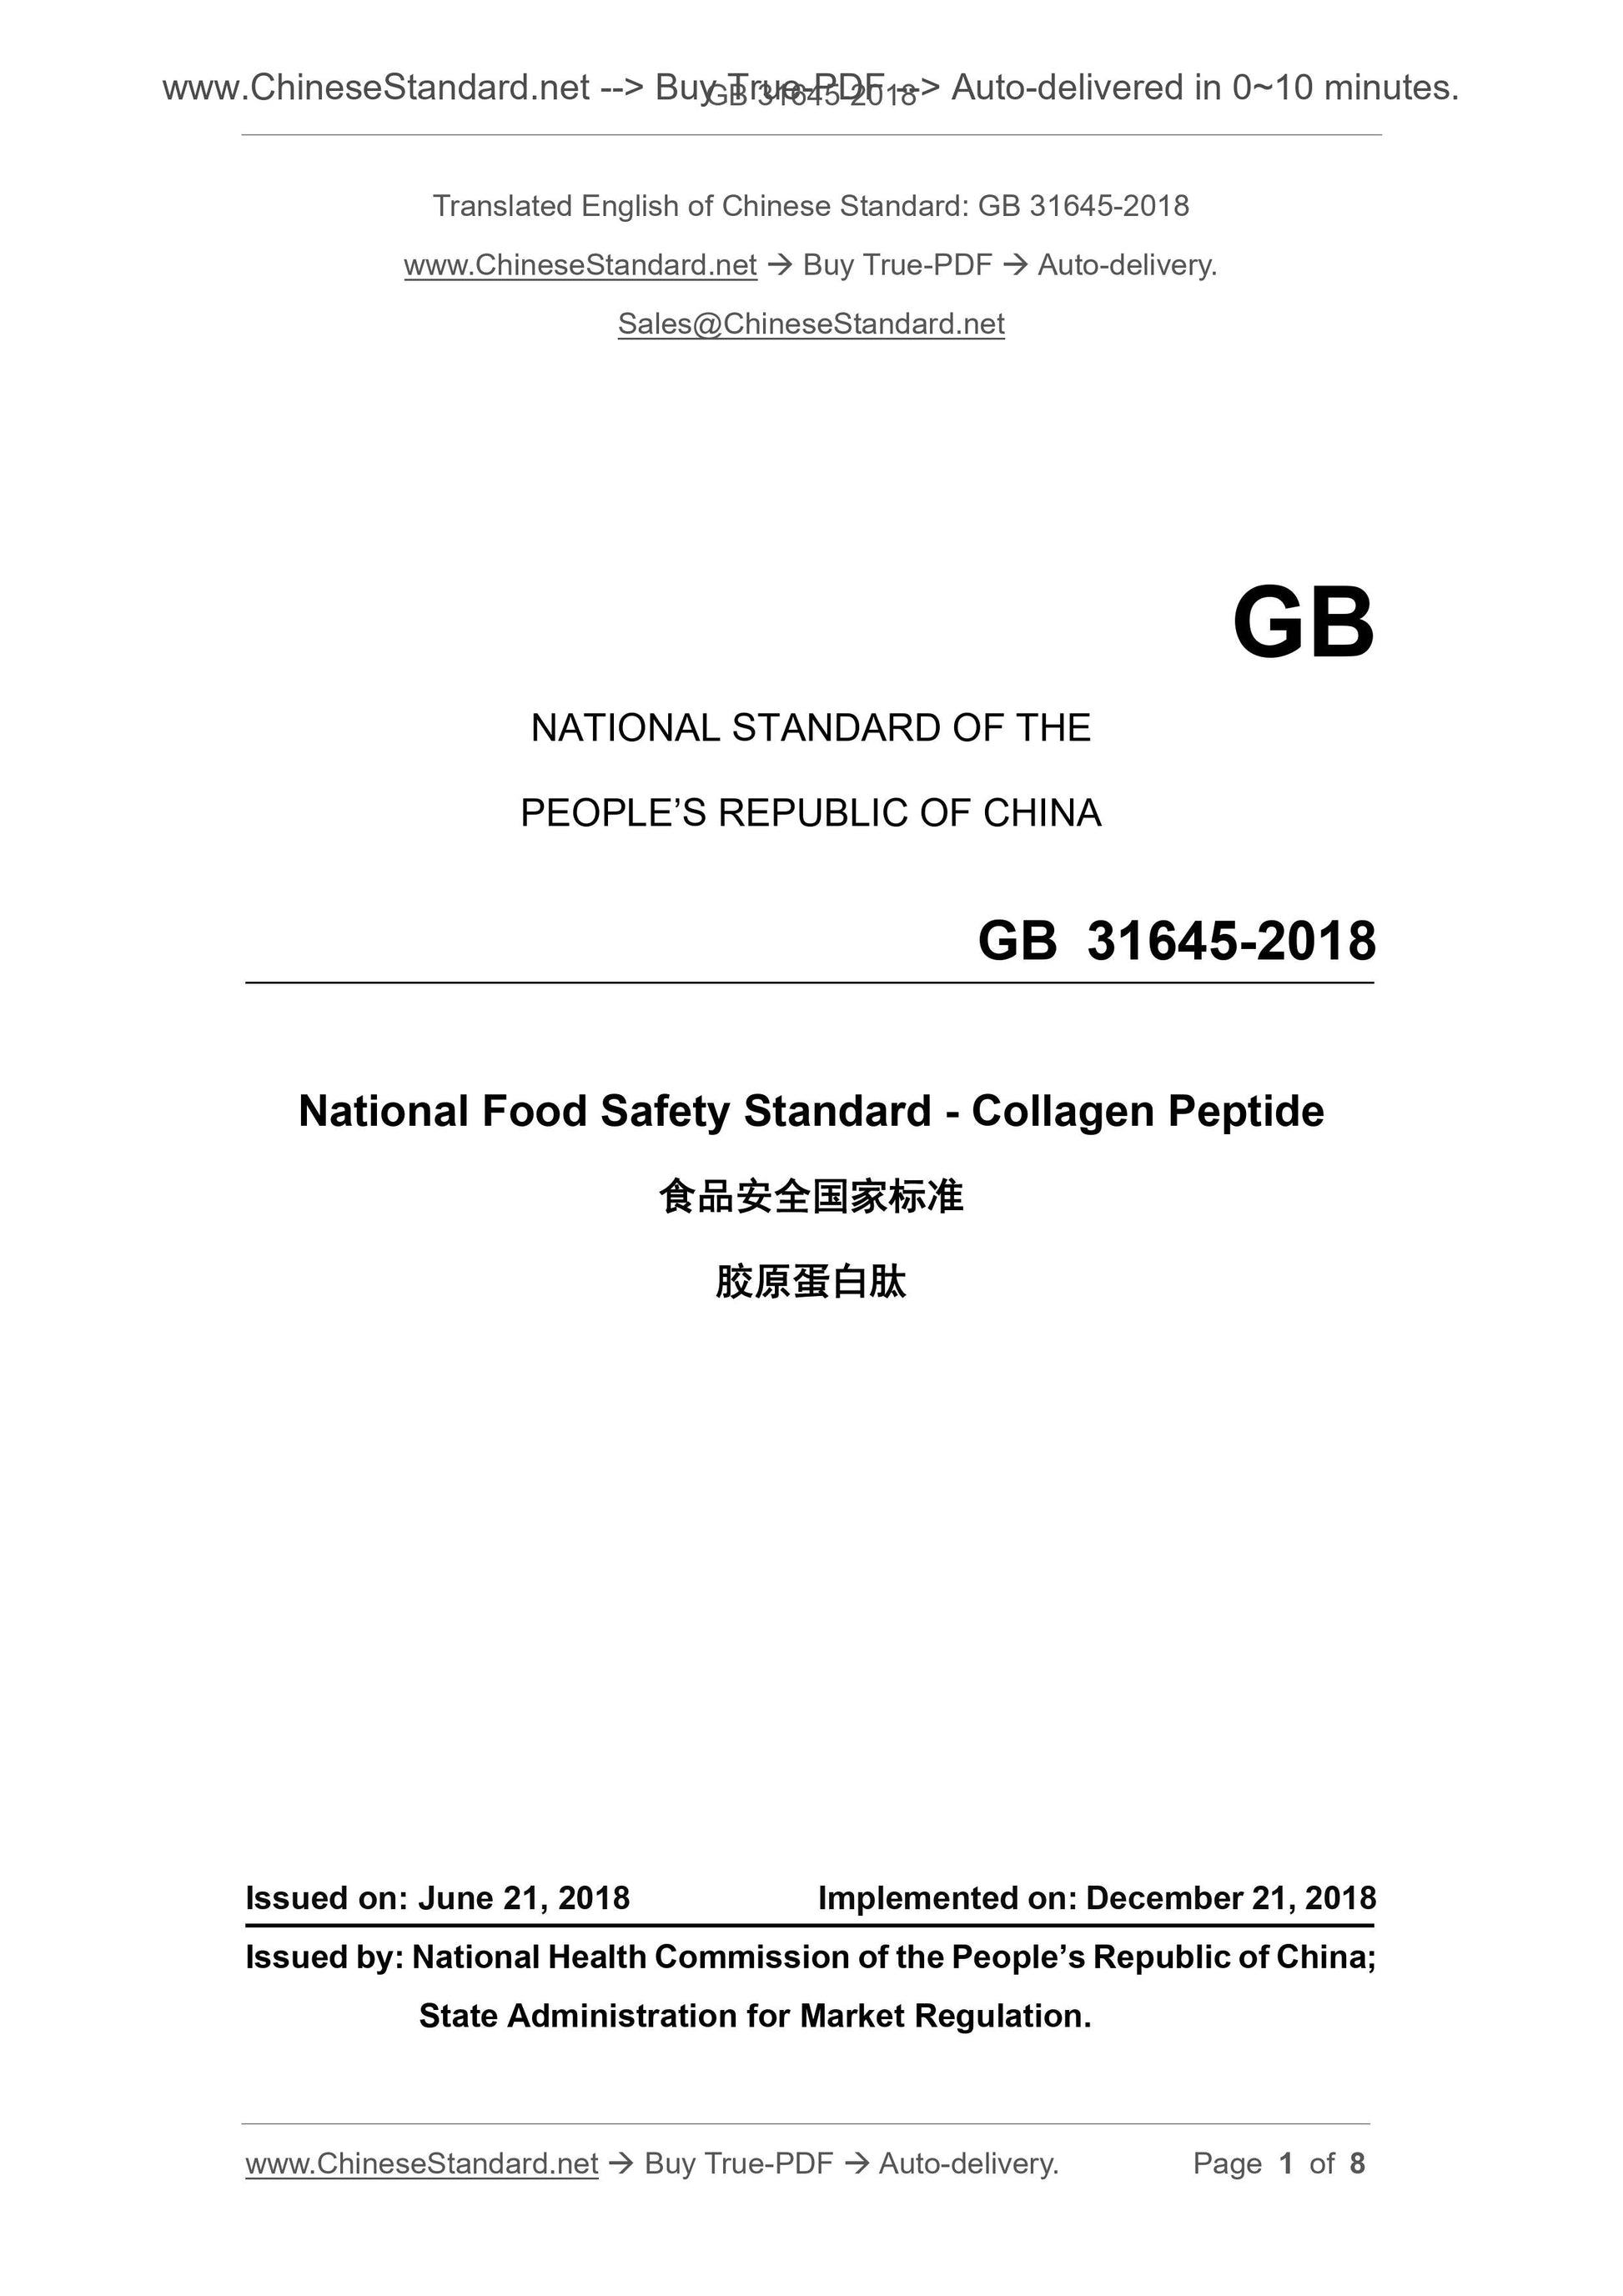 GB 31645-2018 Page 1